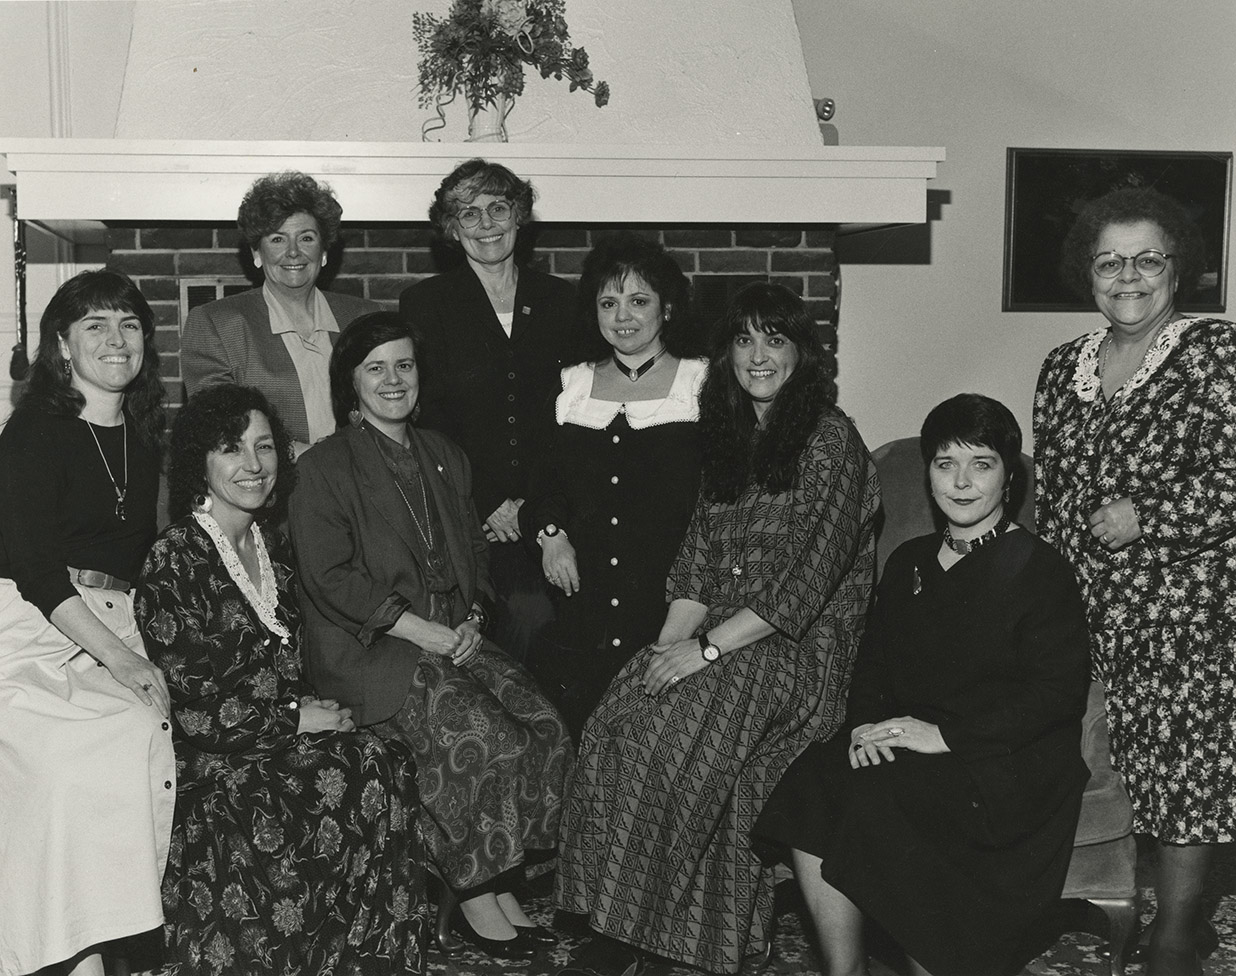 Nova Scotia Advisory Council on the Status of Women Council Members with Minister Responsible for the Nova Scotia Advisory Council on the Status of Women Act and Regulations, April 1994